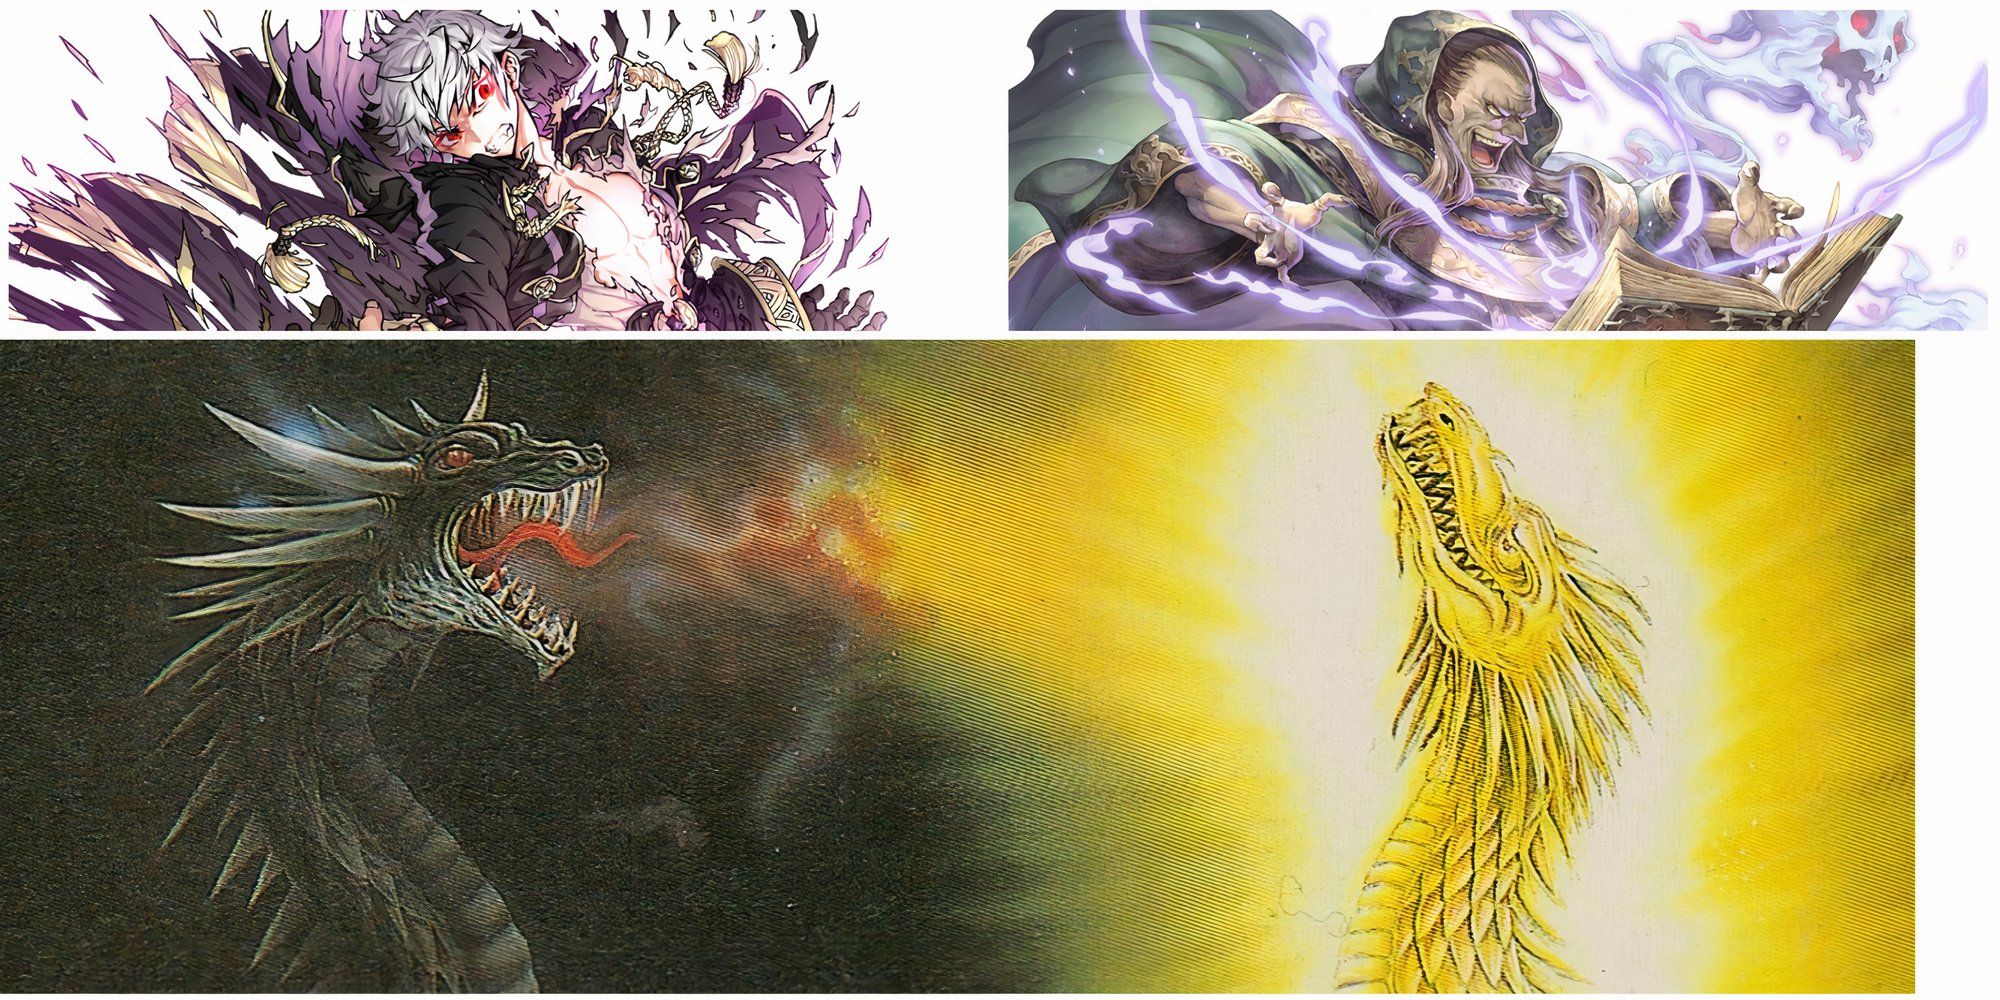 Images Grima possessing Robin, and Gharnef using magic at the top with an image of Loptr attacking Naga at the bottom